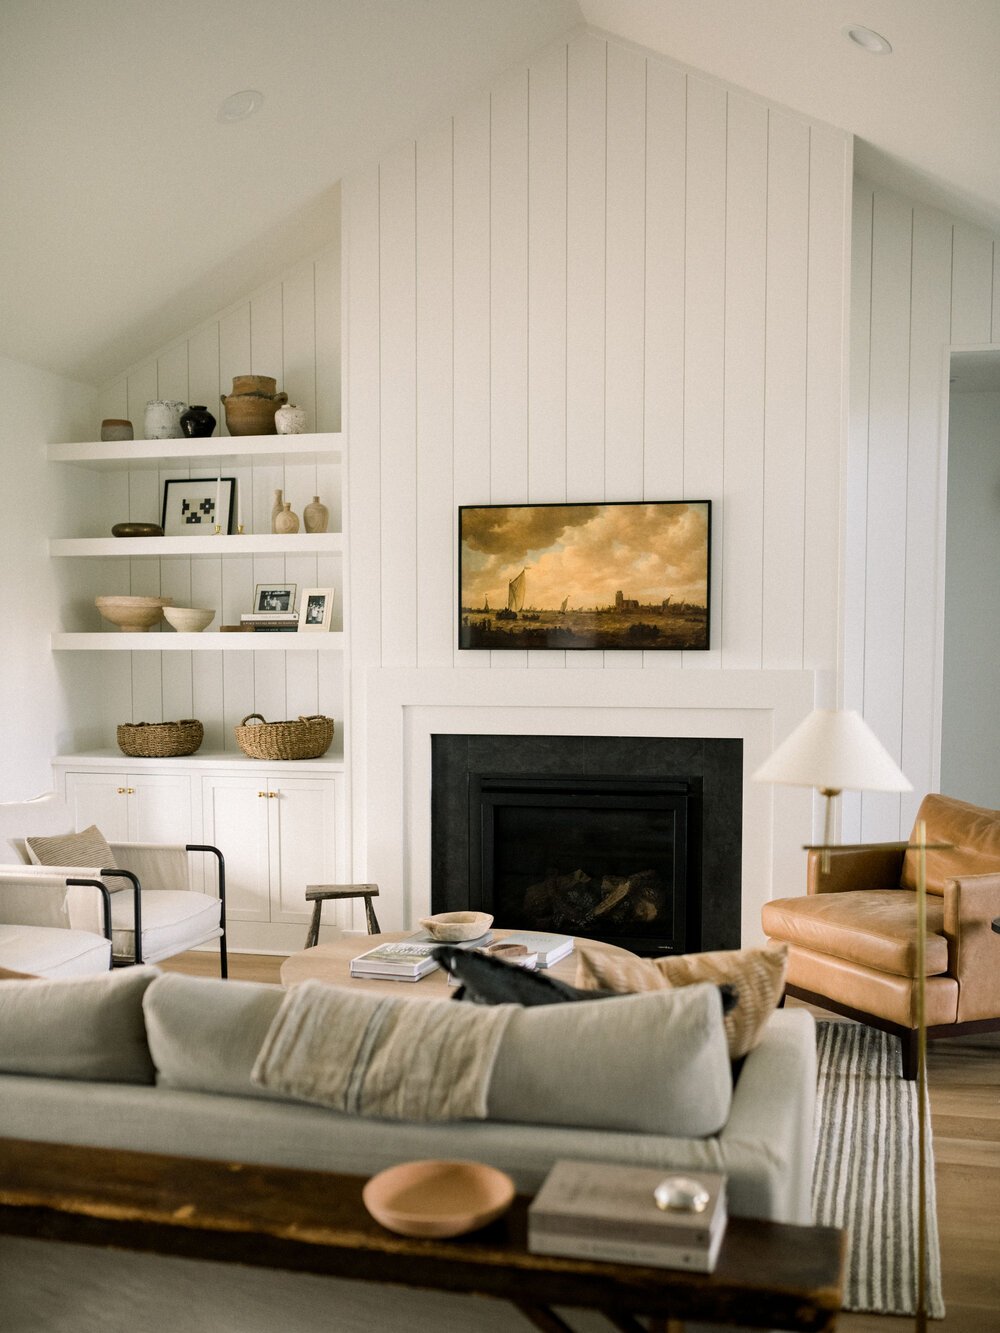 10 Stunning Ideas For Built Ins Around A Fireplace Jenna Kate At Home